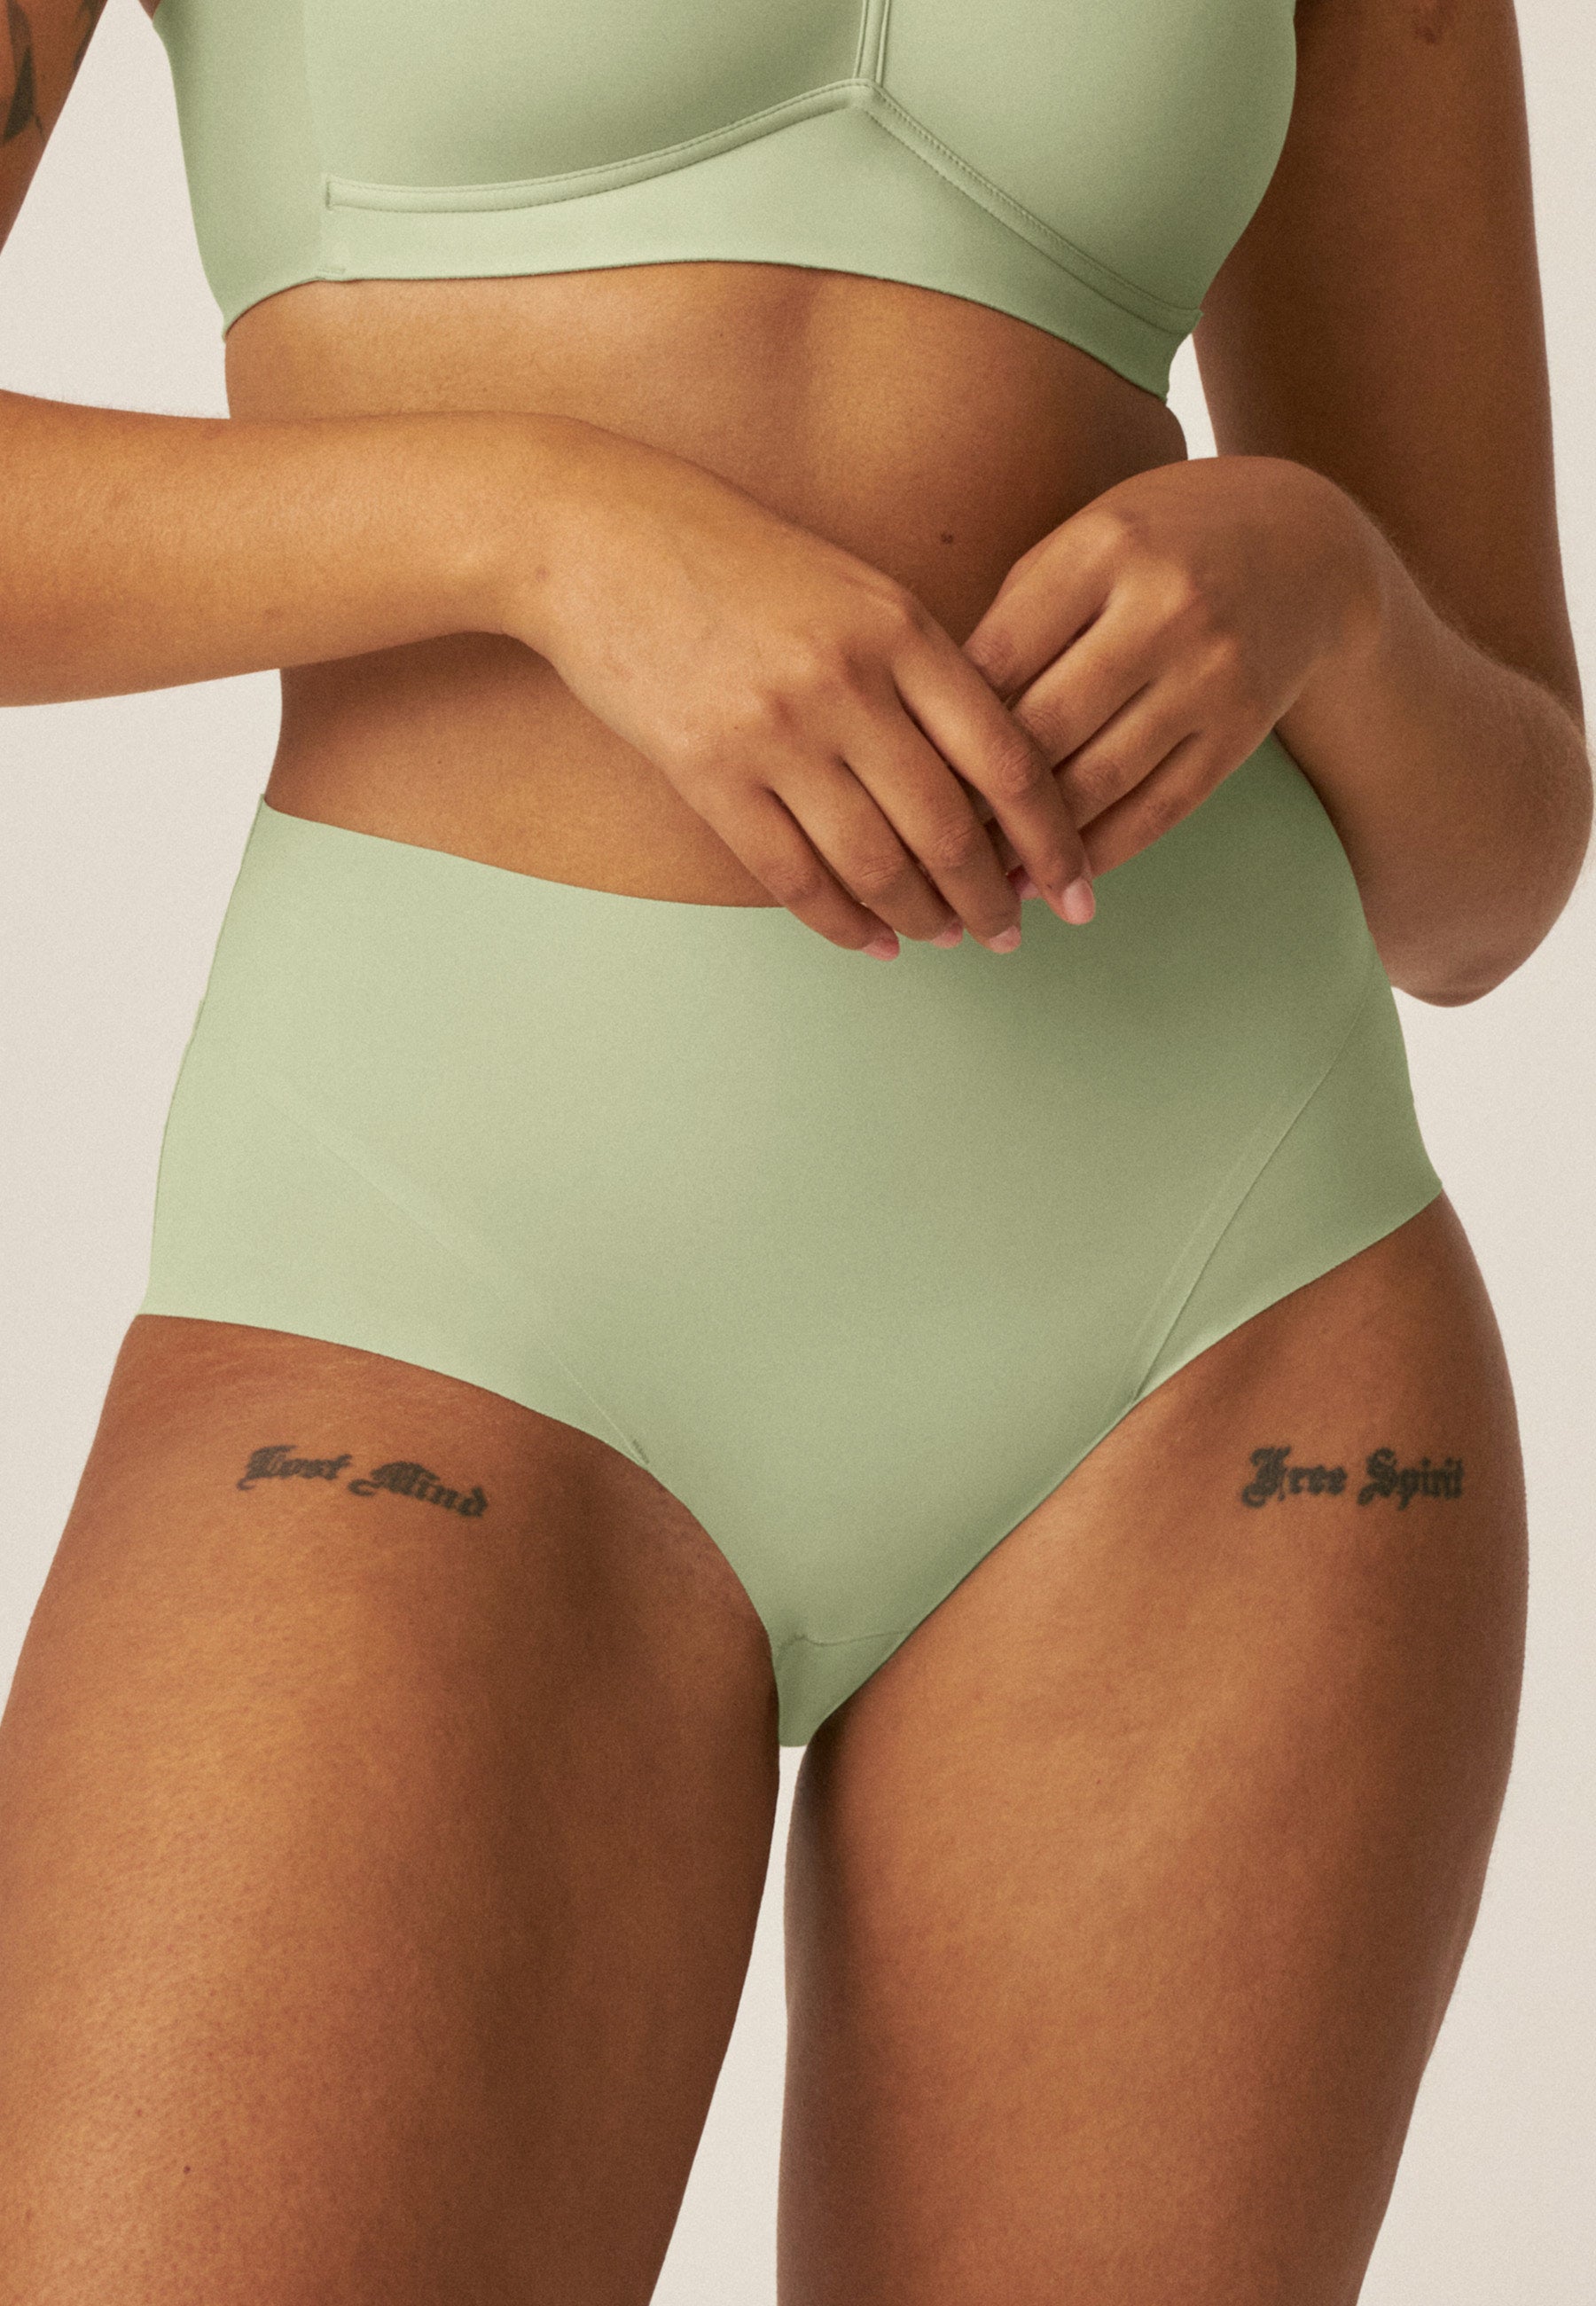 High Waist Brief with a Light Shaping Effect - Pale Greenshield